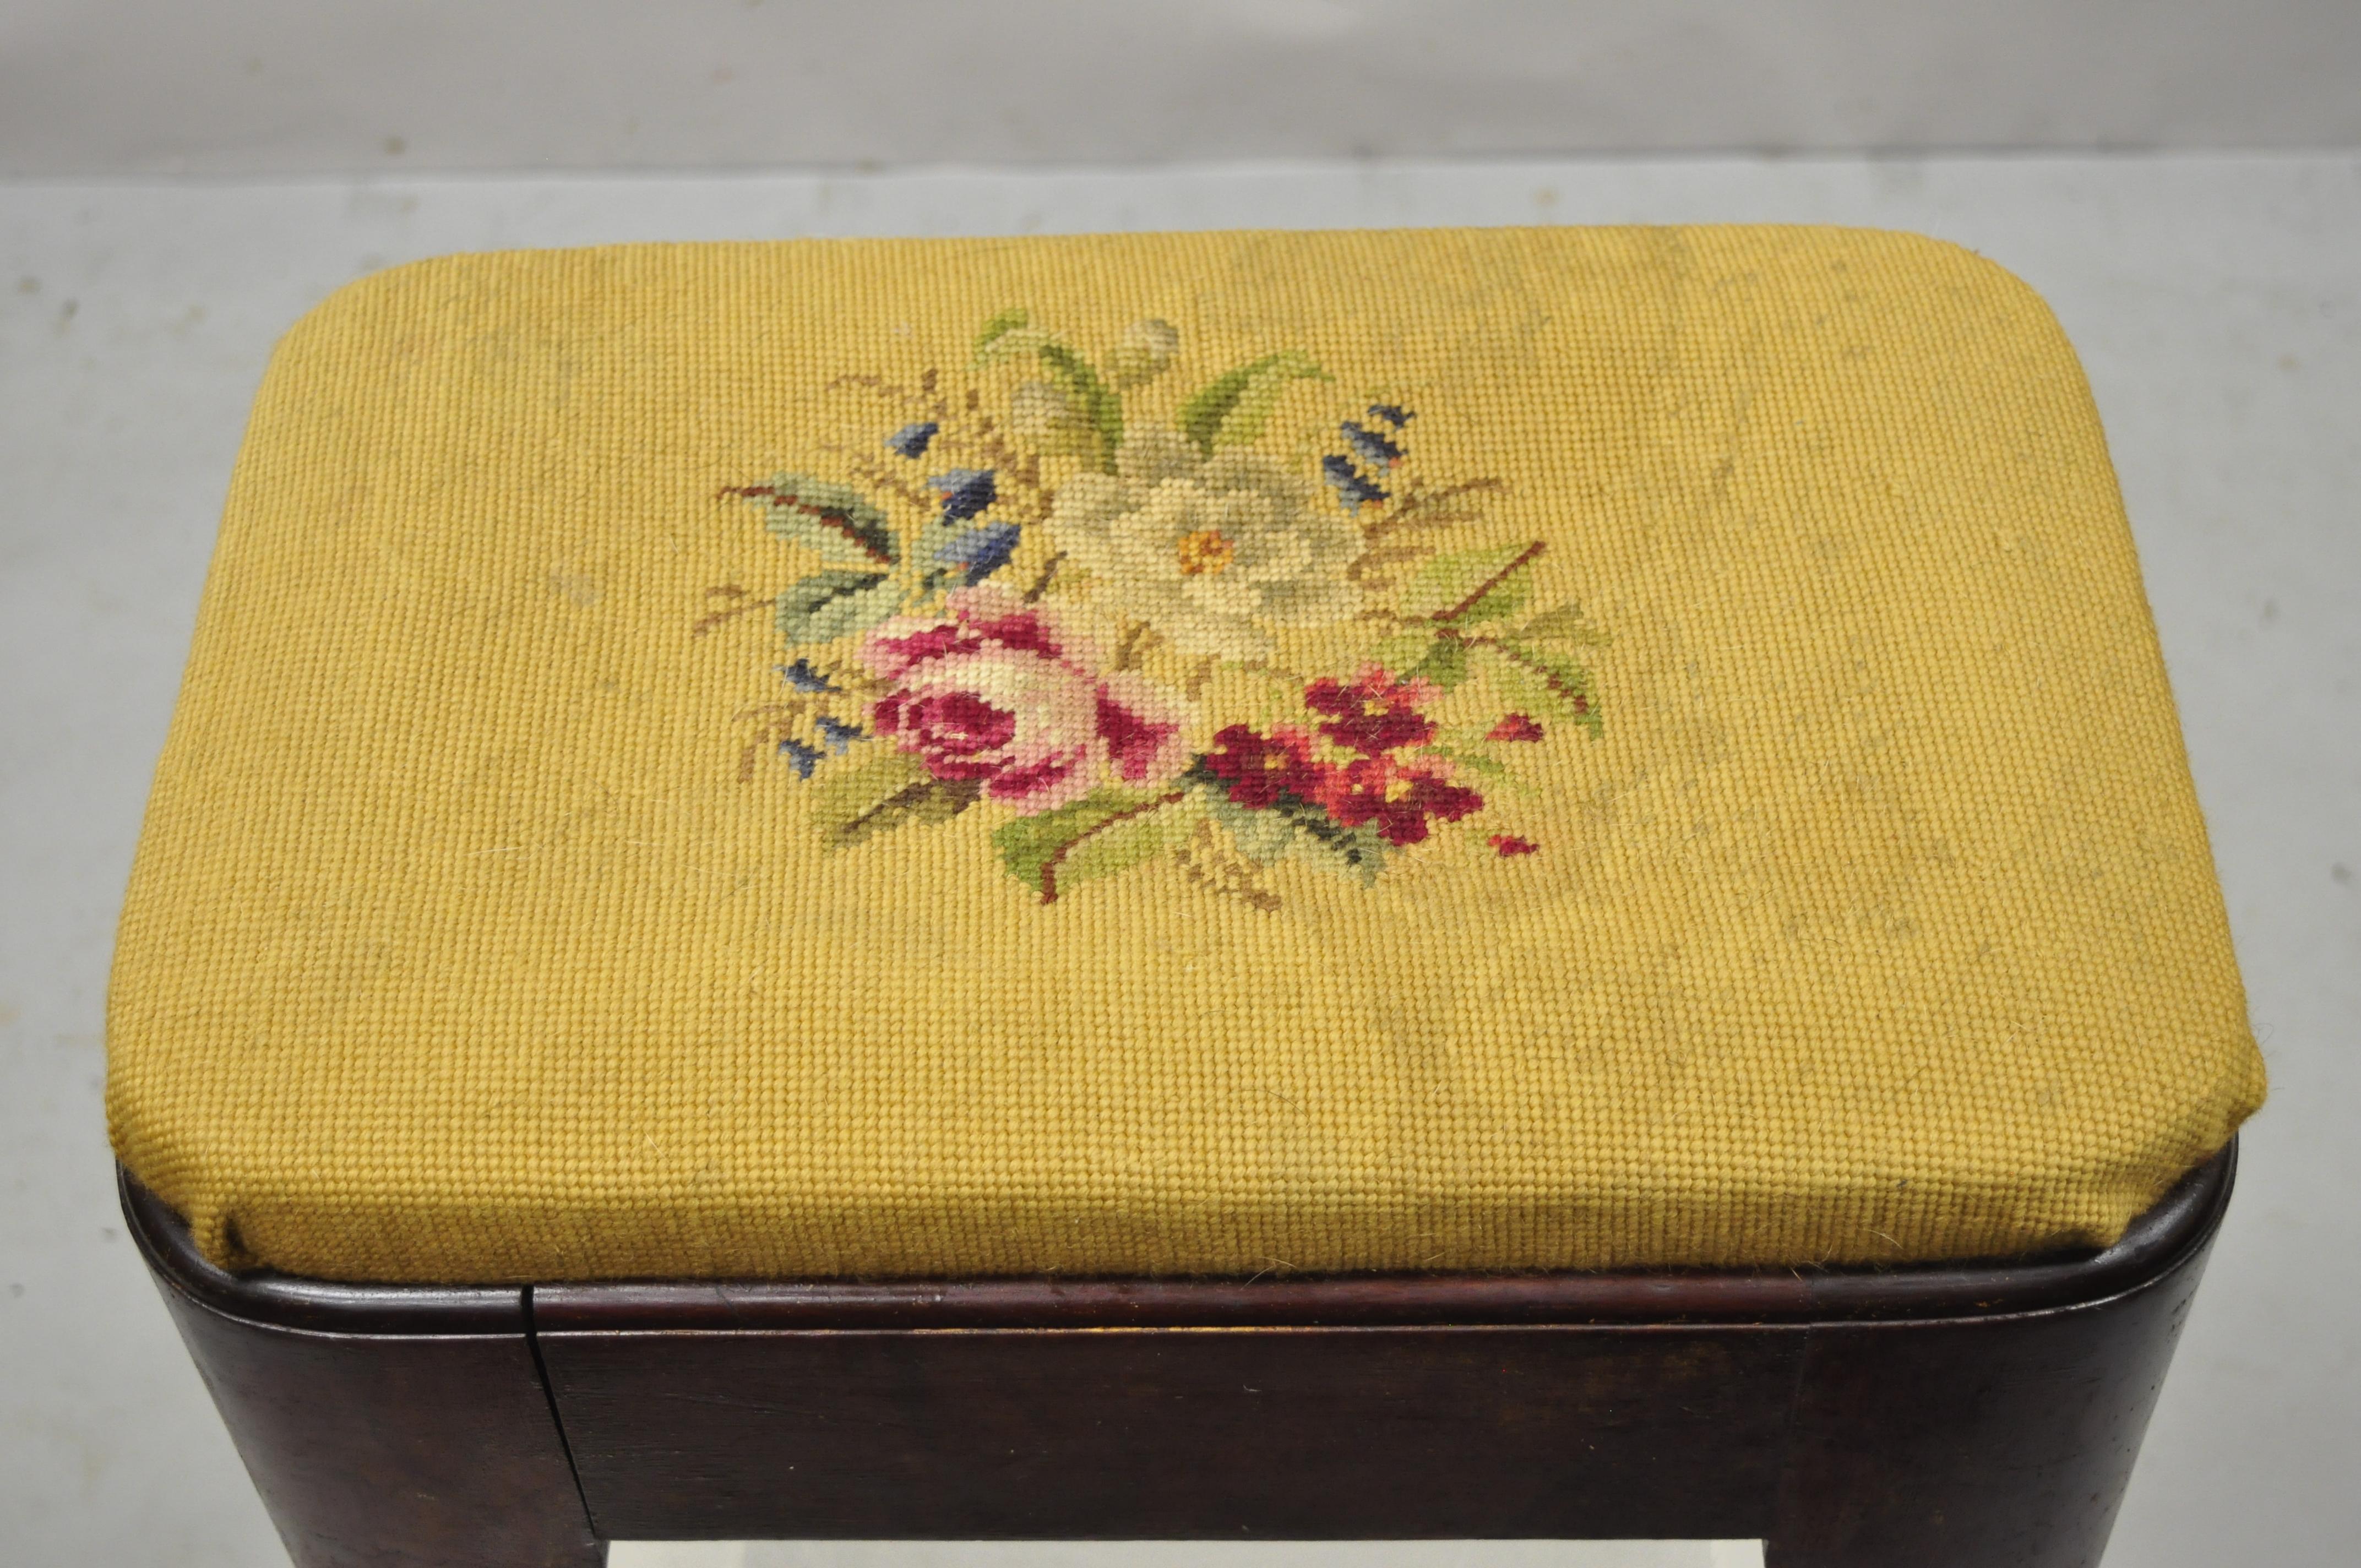 North American Antique Victorian Empire Crotch Mahogany Floral Needlepoint Footstool Ottoman